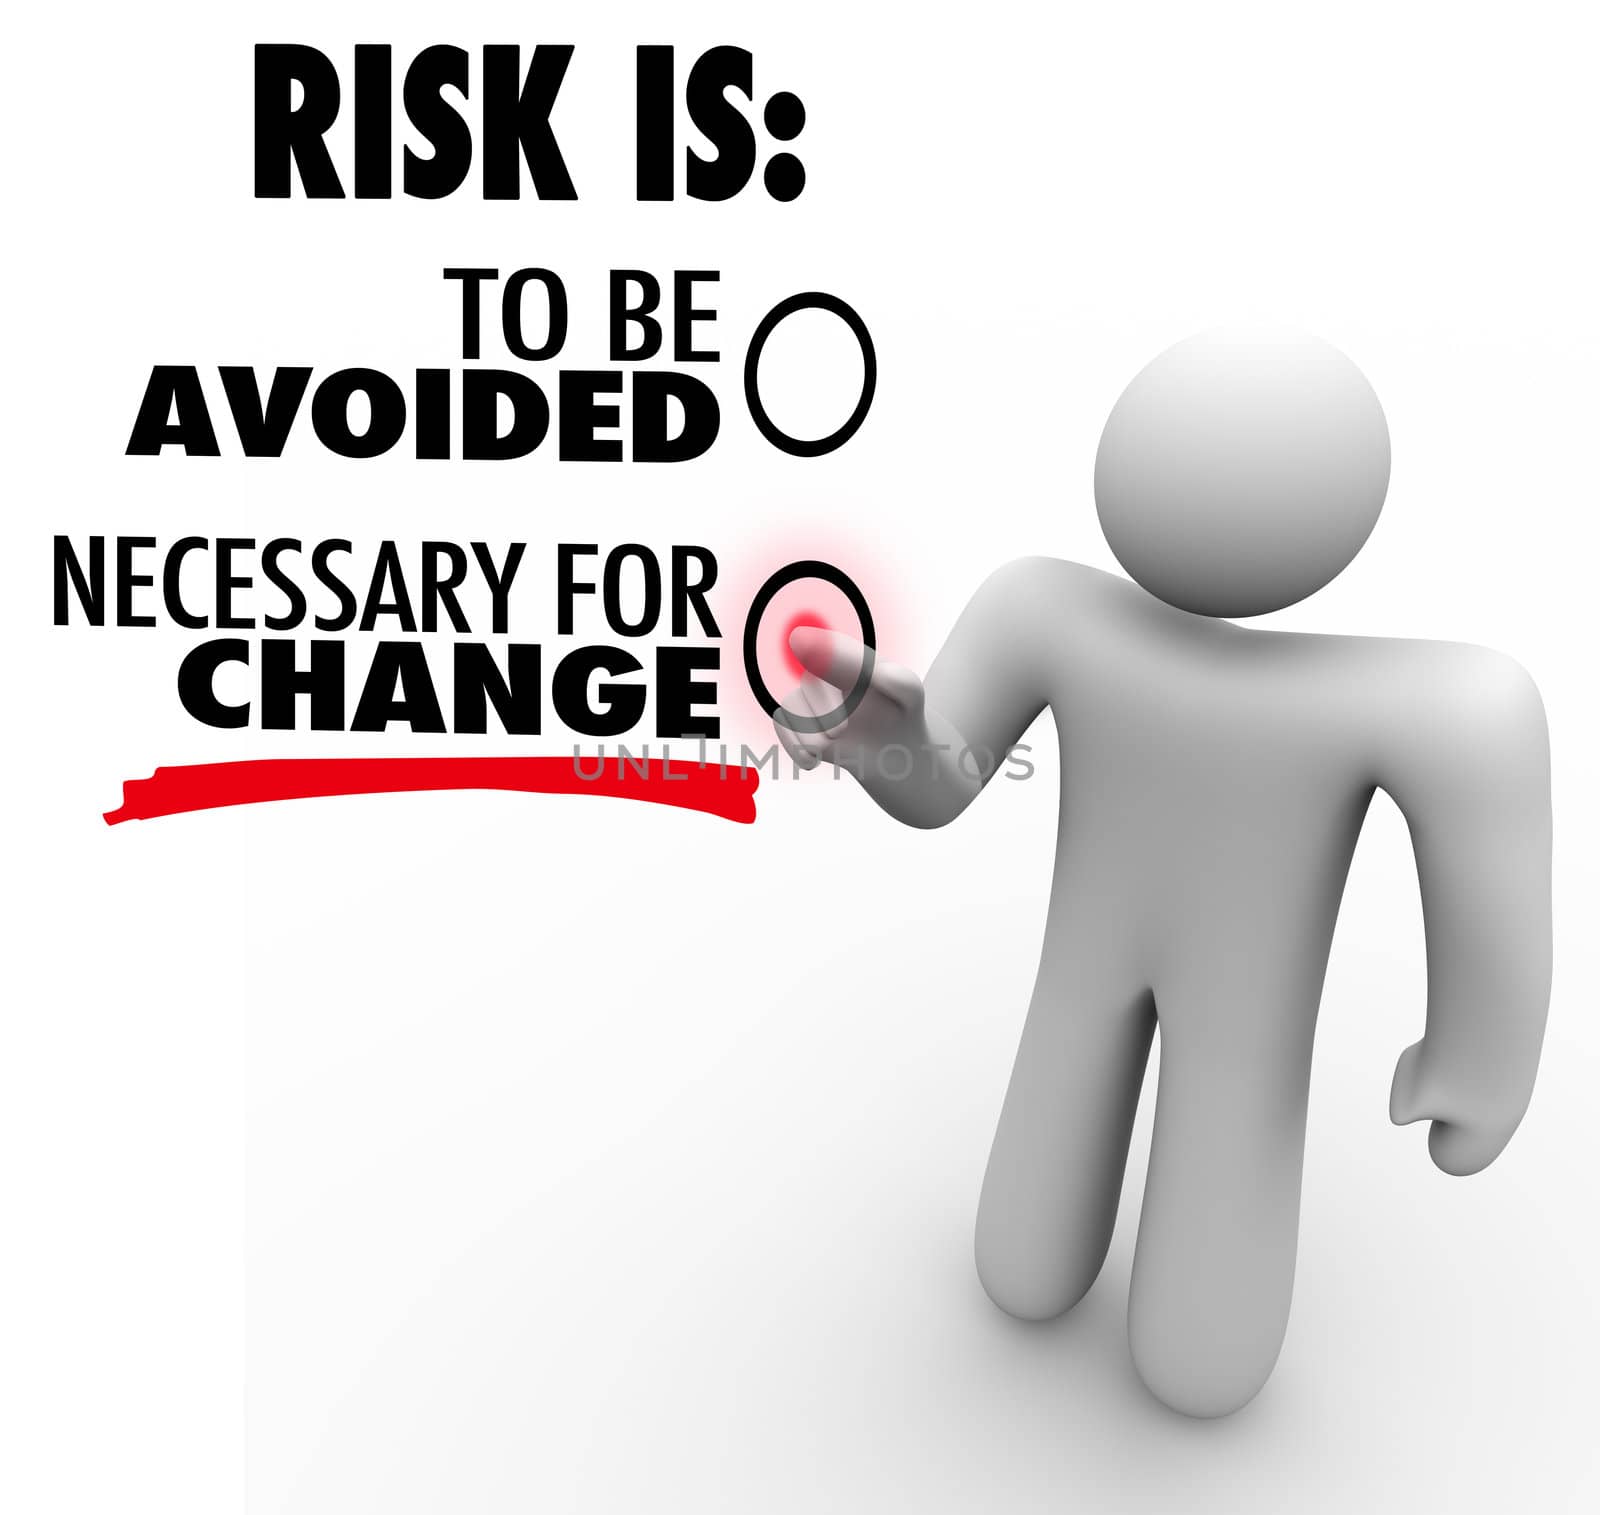 A man presses a button for the idea that Risk is Necessary for Change instead of to Be Avoided, symbolizing the necessity of adapting in order to grow and succeed